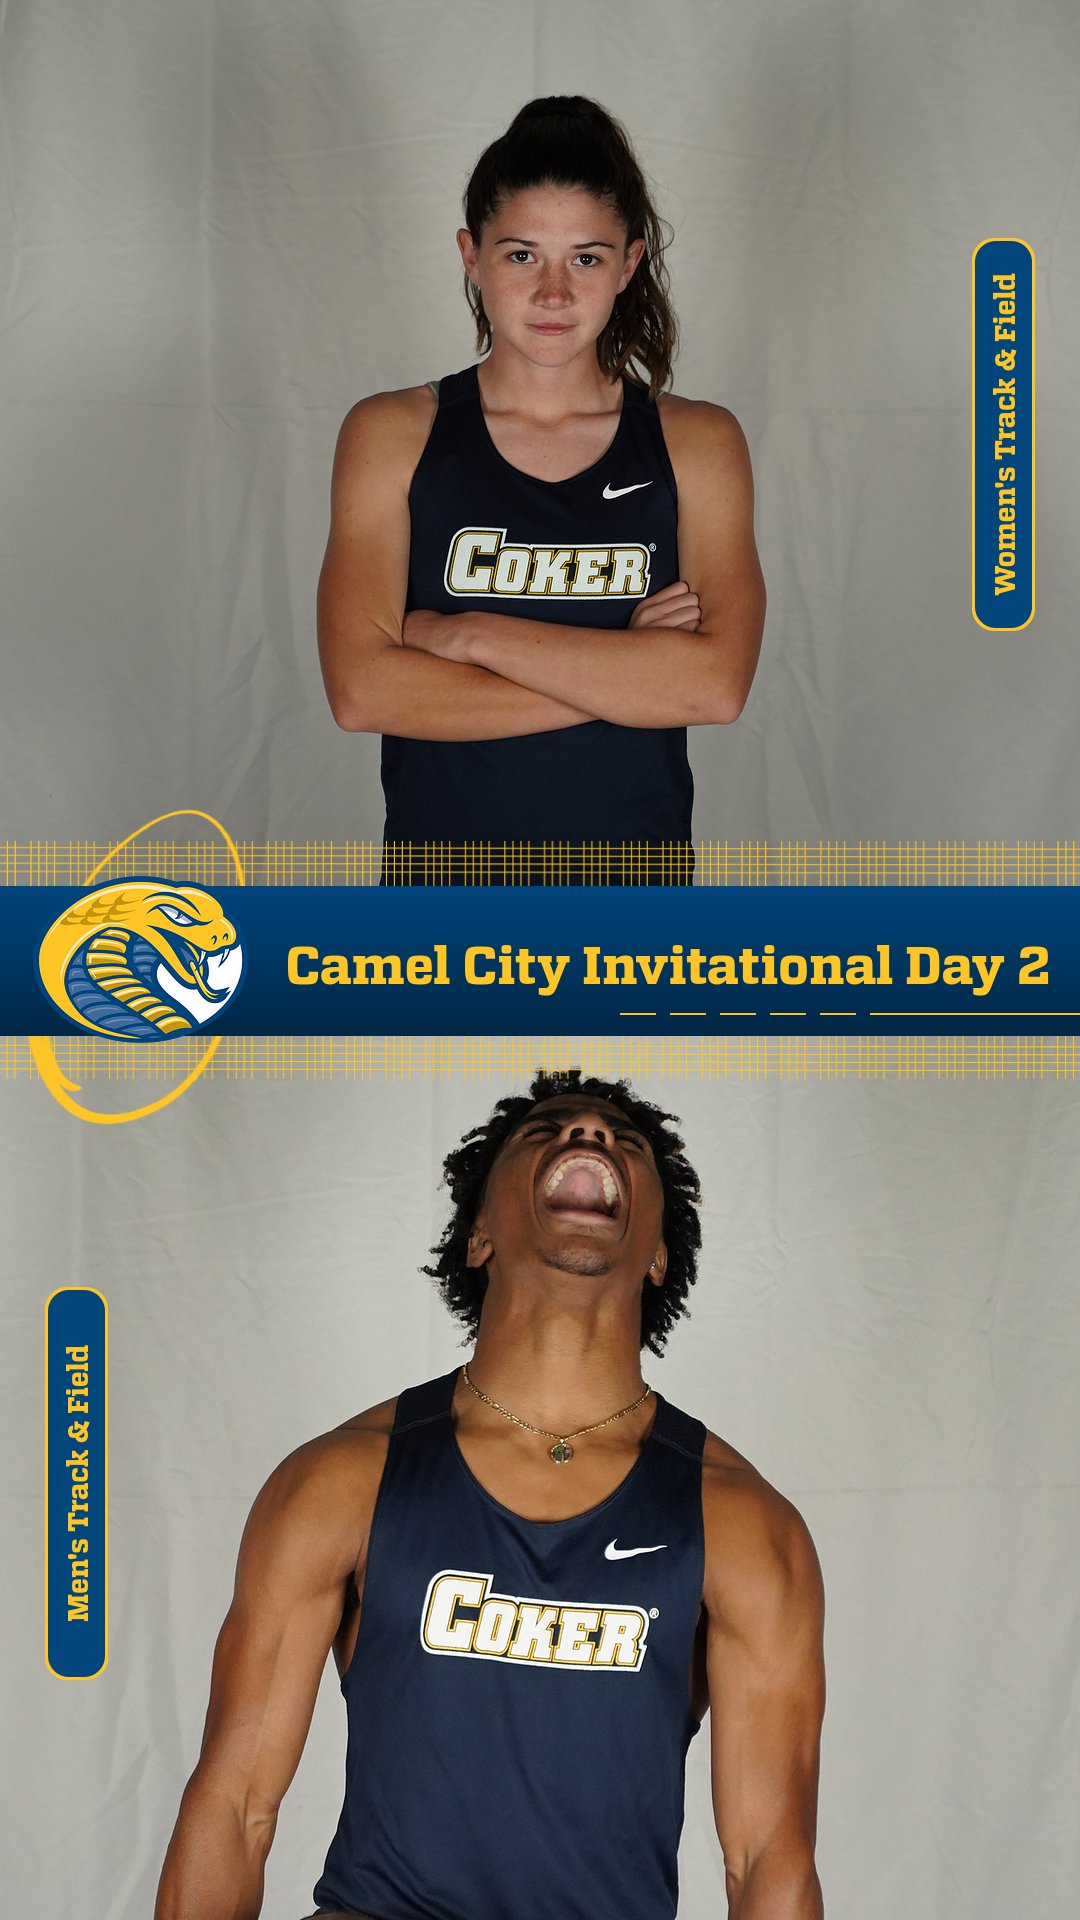 Women's Track & Field Competes in Day 1 of the Camel City Invitational